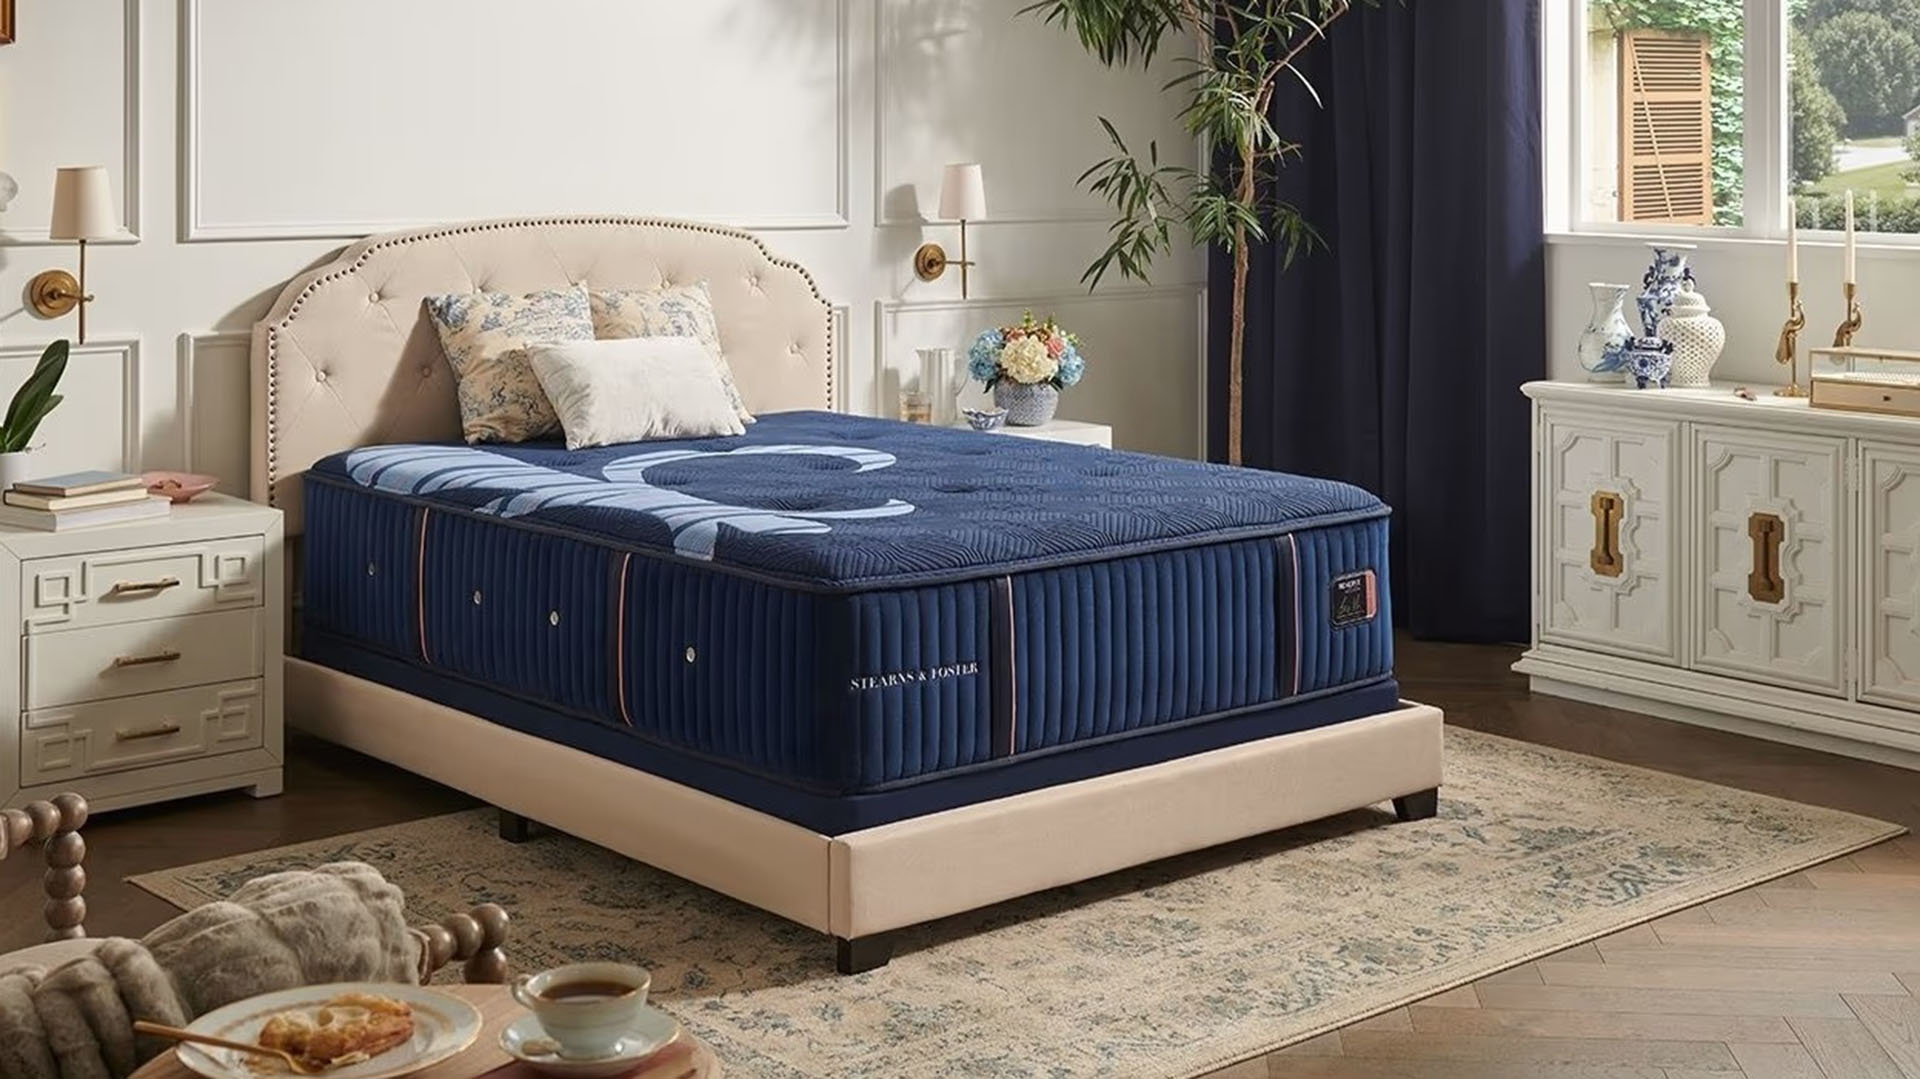 Stearns & Foster mattresses in Layton are designed with comfort and support in mind.